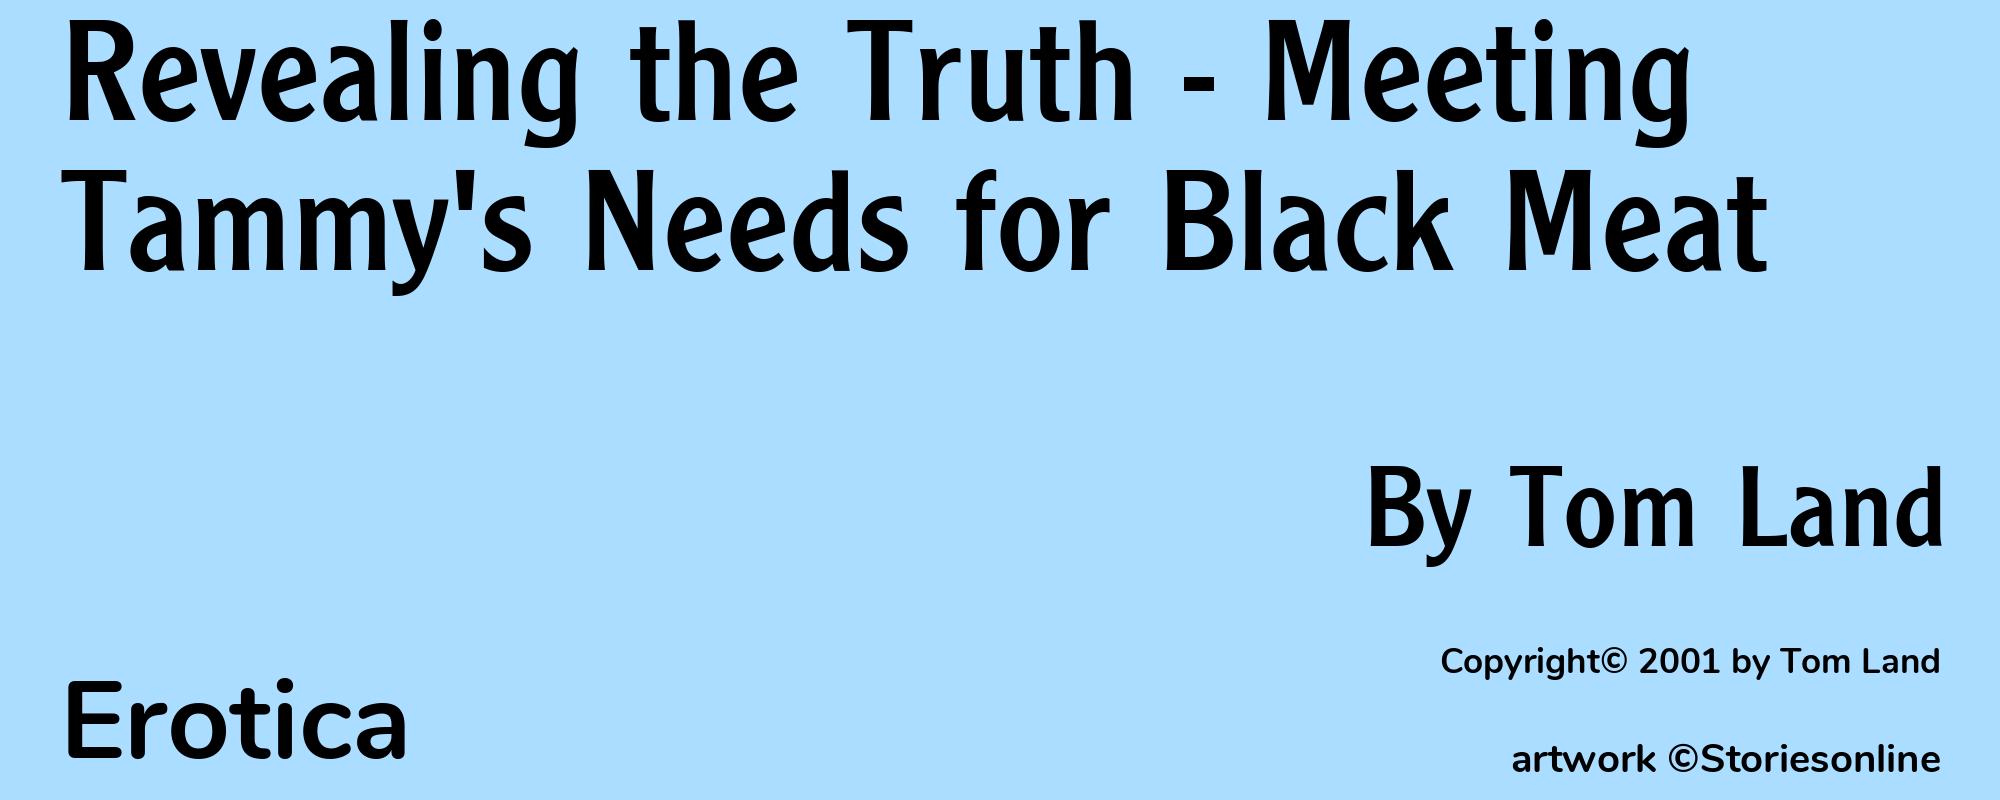 Revealing the Truth - Meeting Tammy's Needs for Black Meat - Cover